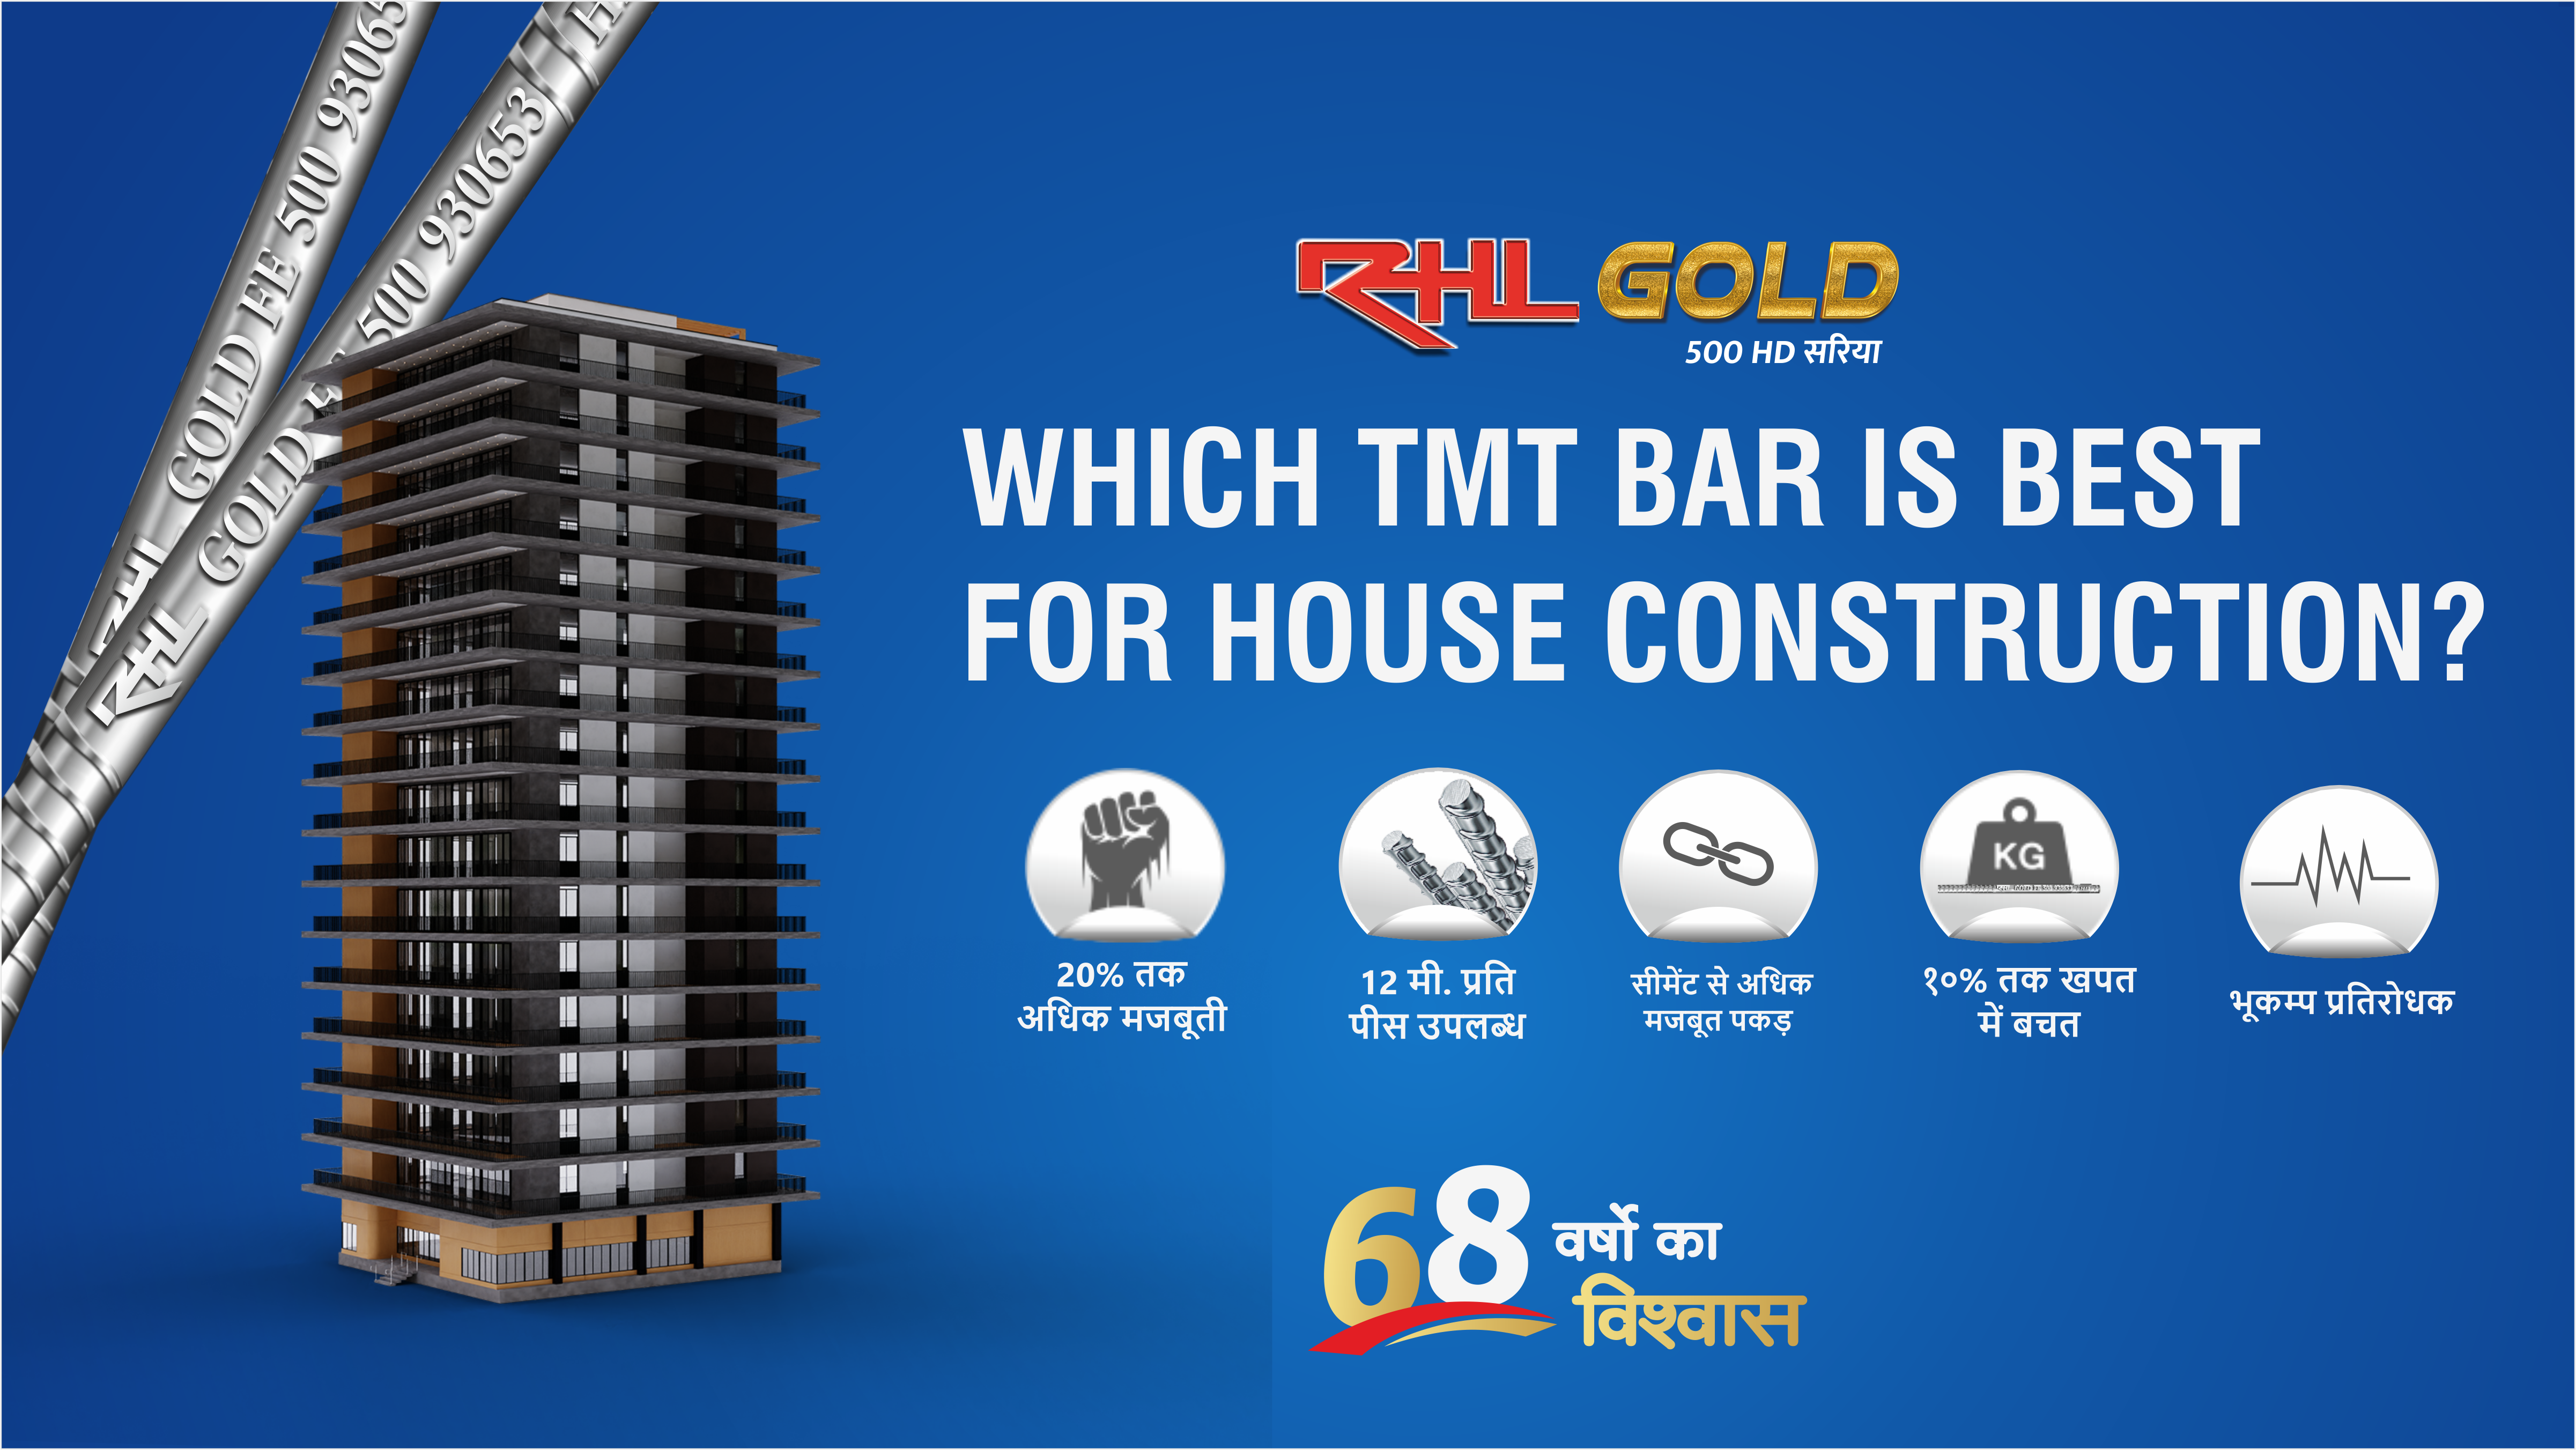 Which TMT bar is best for house construction?